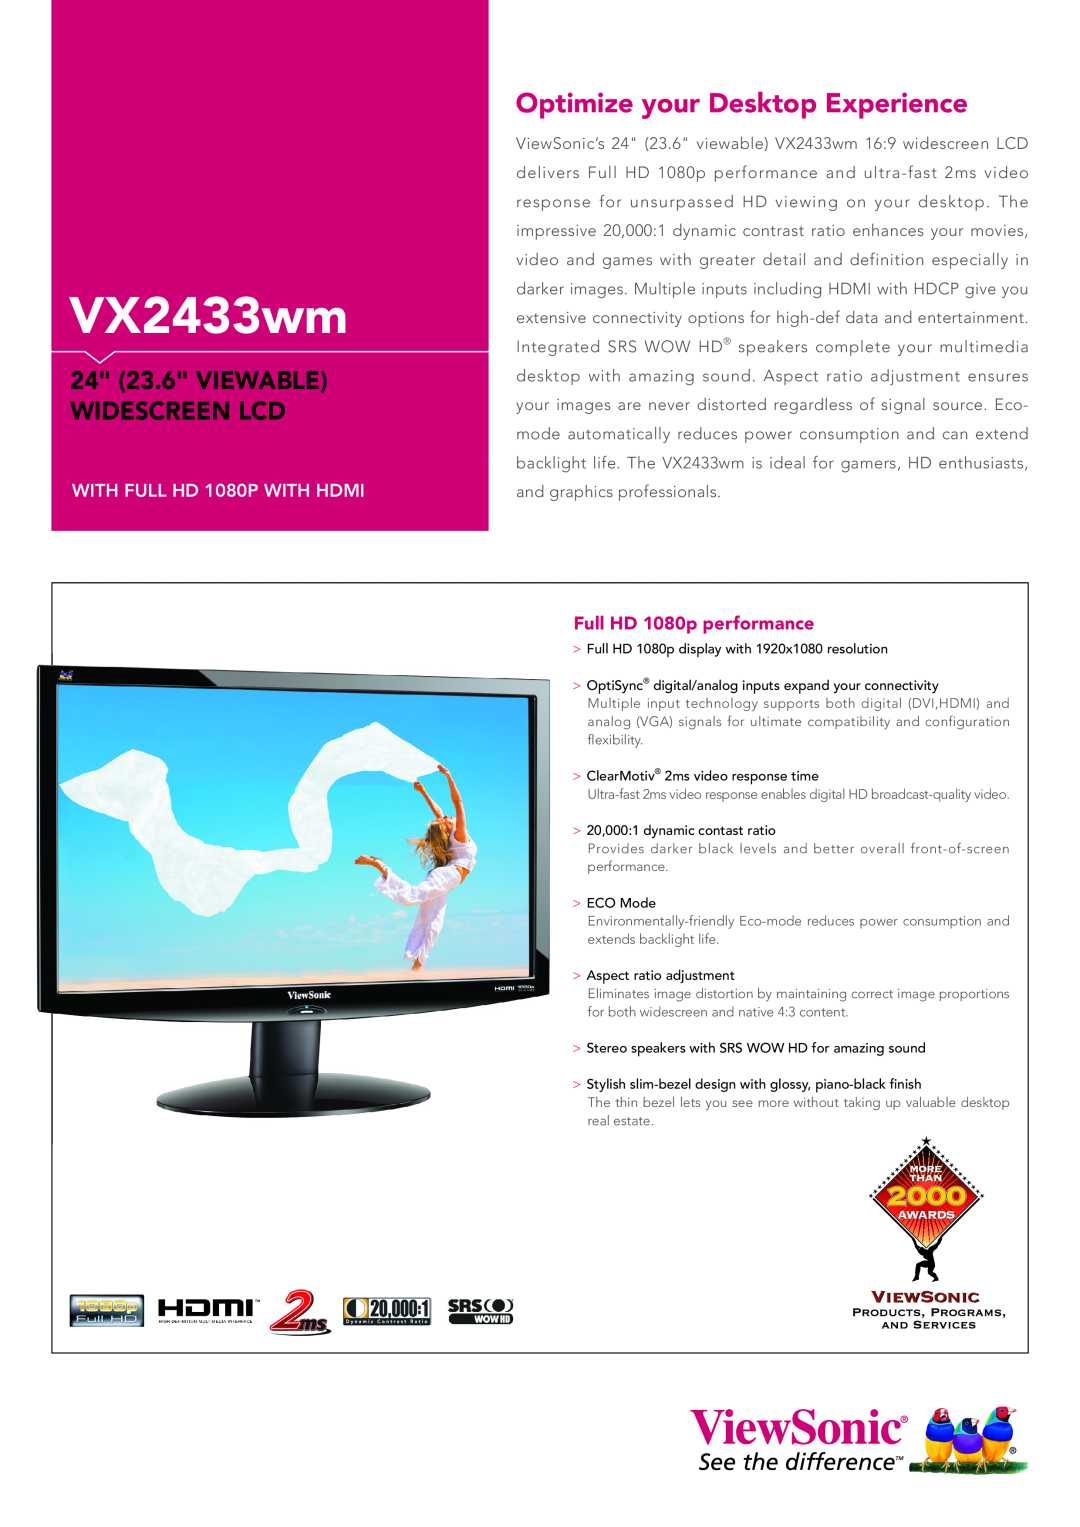 ViewSonic VX2433wm manual Optimize your Desktop Experience, 24 23.6 VIEWABLE WIDESCREEN LCD, WITH FULL HD 1080P WITH HDMI 